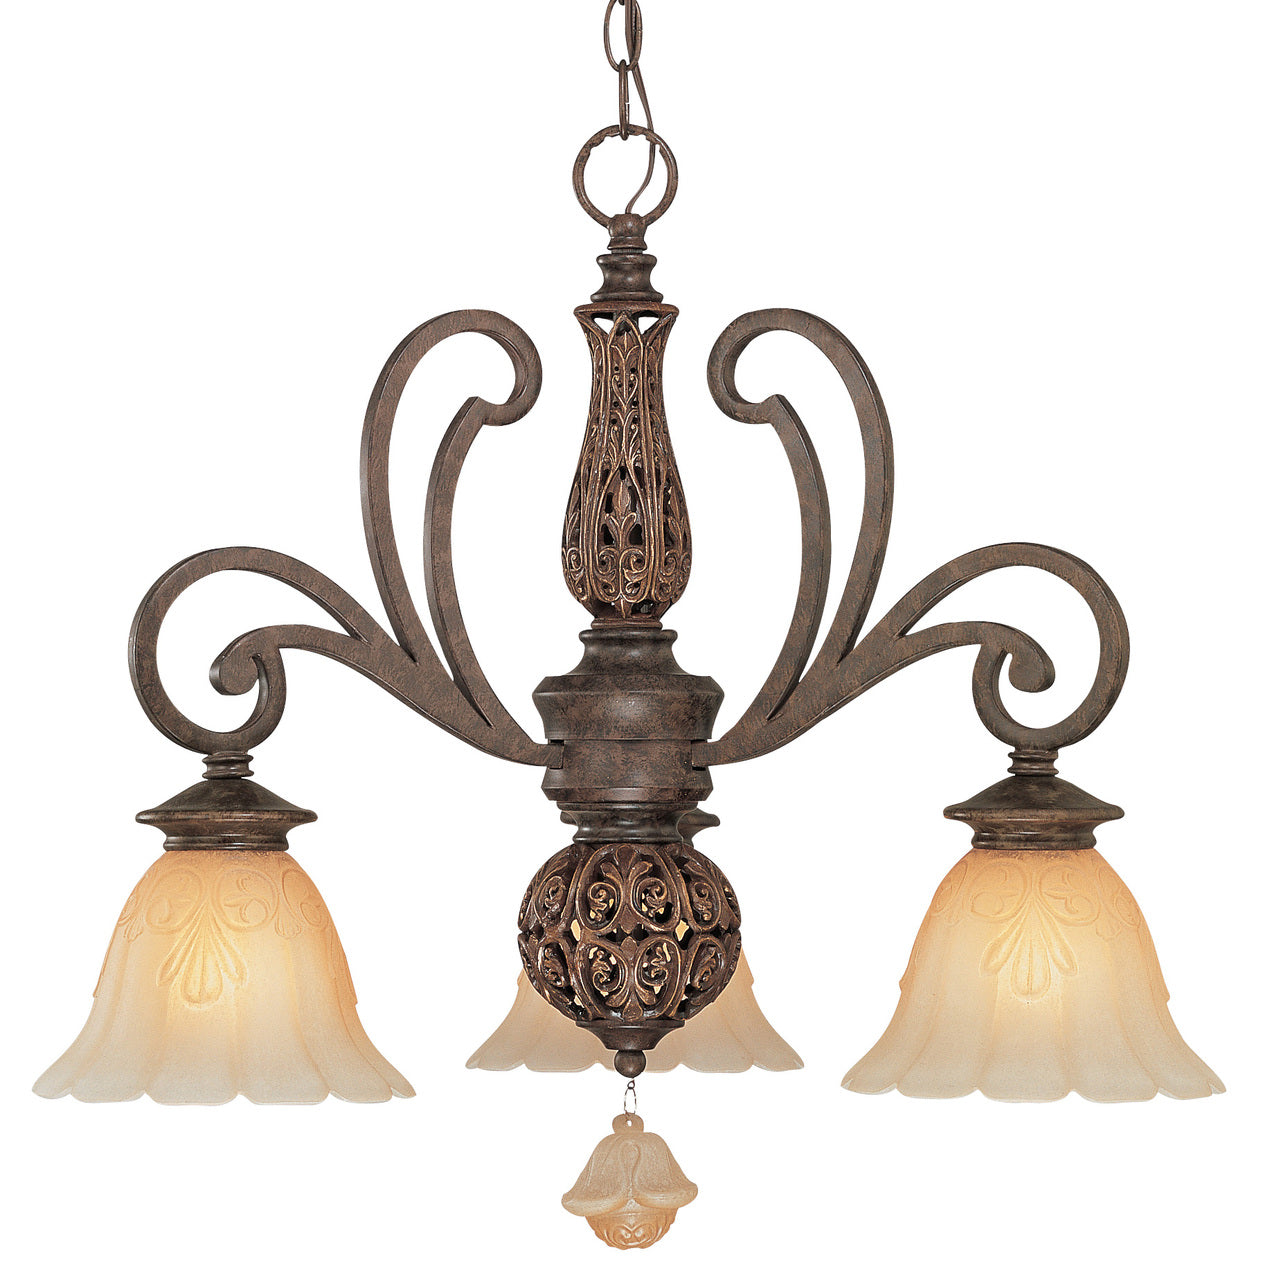 Classic Lighting 71157 TS Riviera Wrought Iron Chandelier in Tortoise Shell